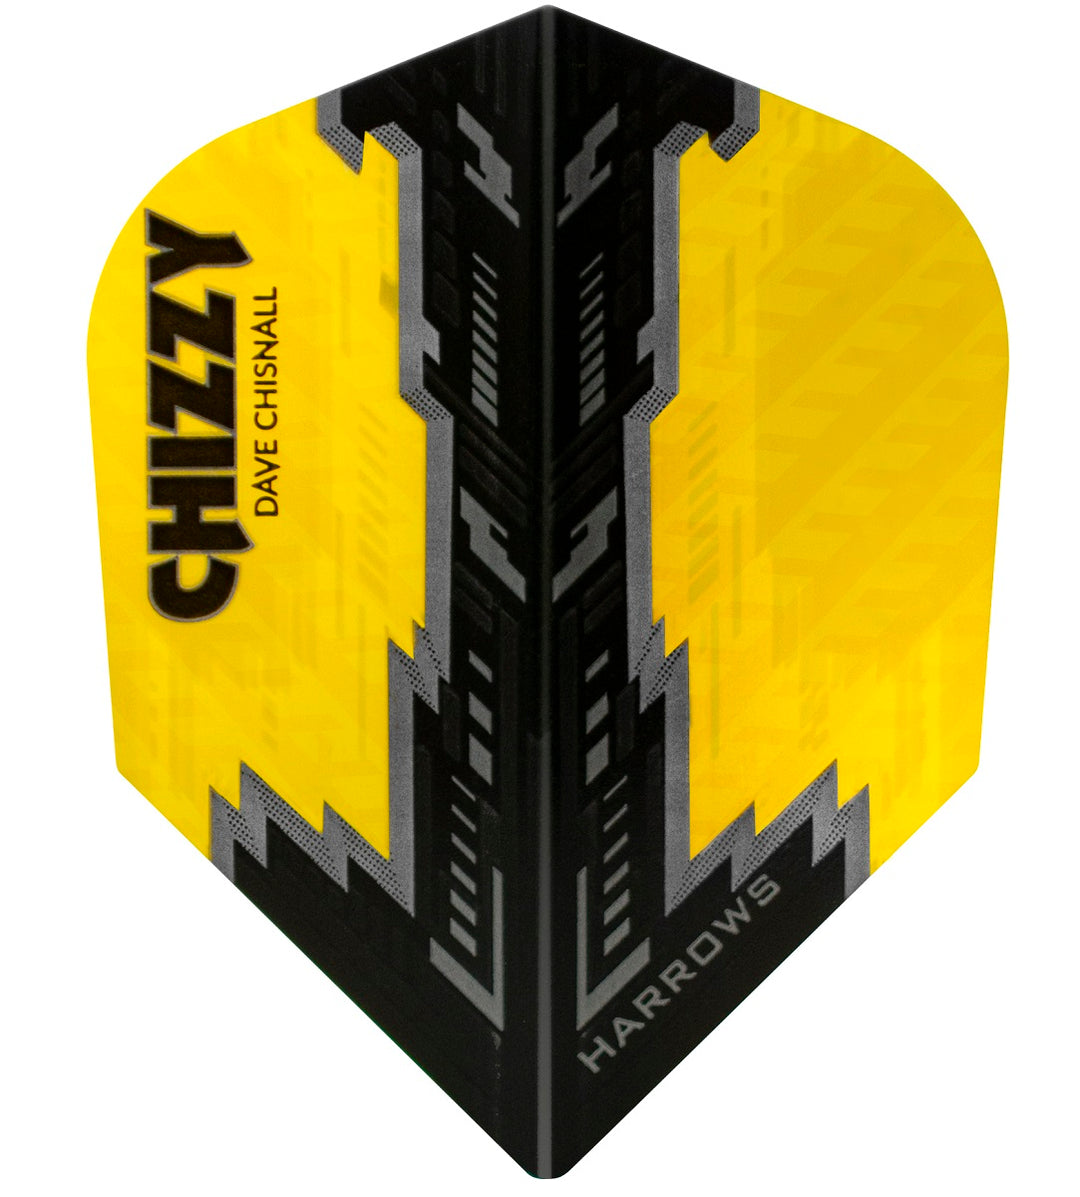 Dave Chisnall Yellow and Black Chizzy Dart Flights by Harrows - 7531